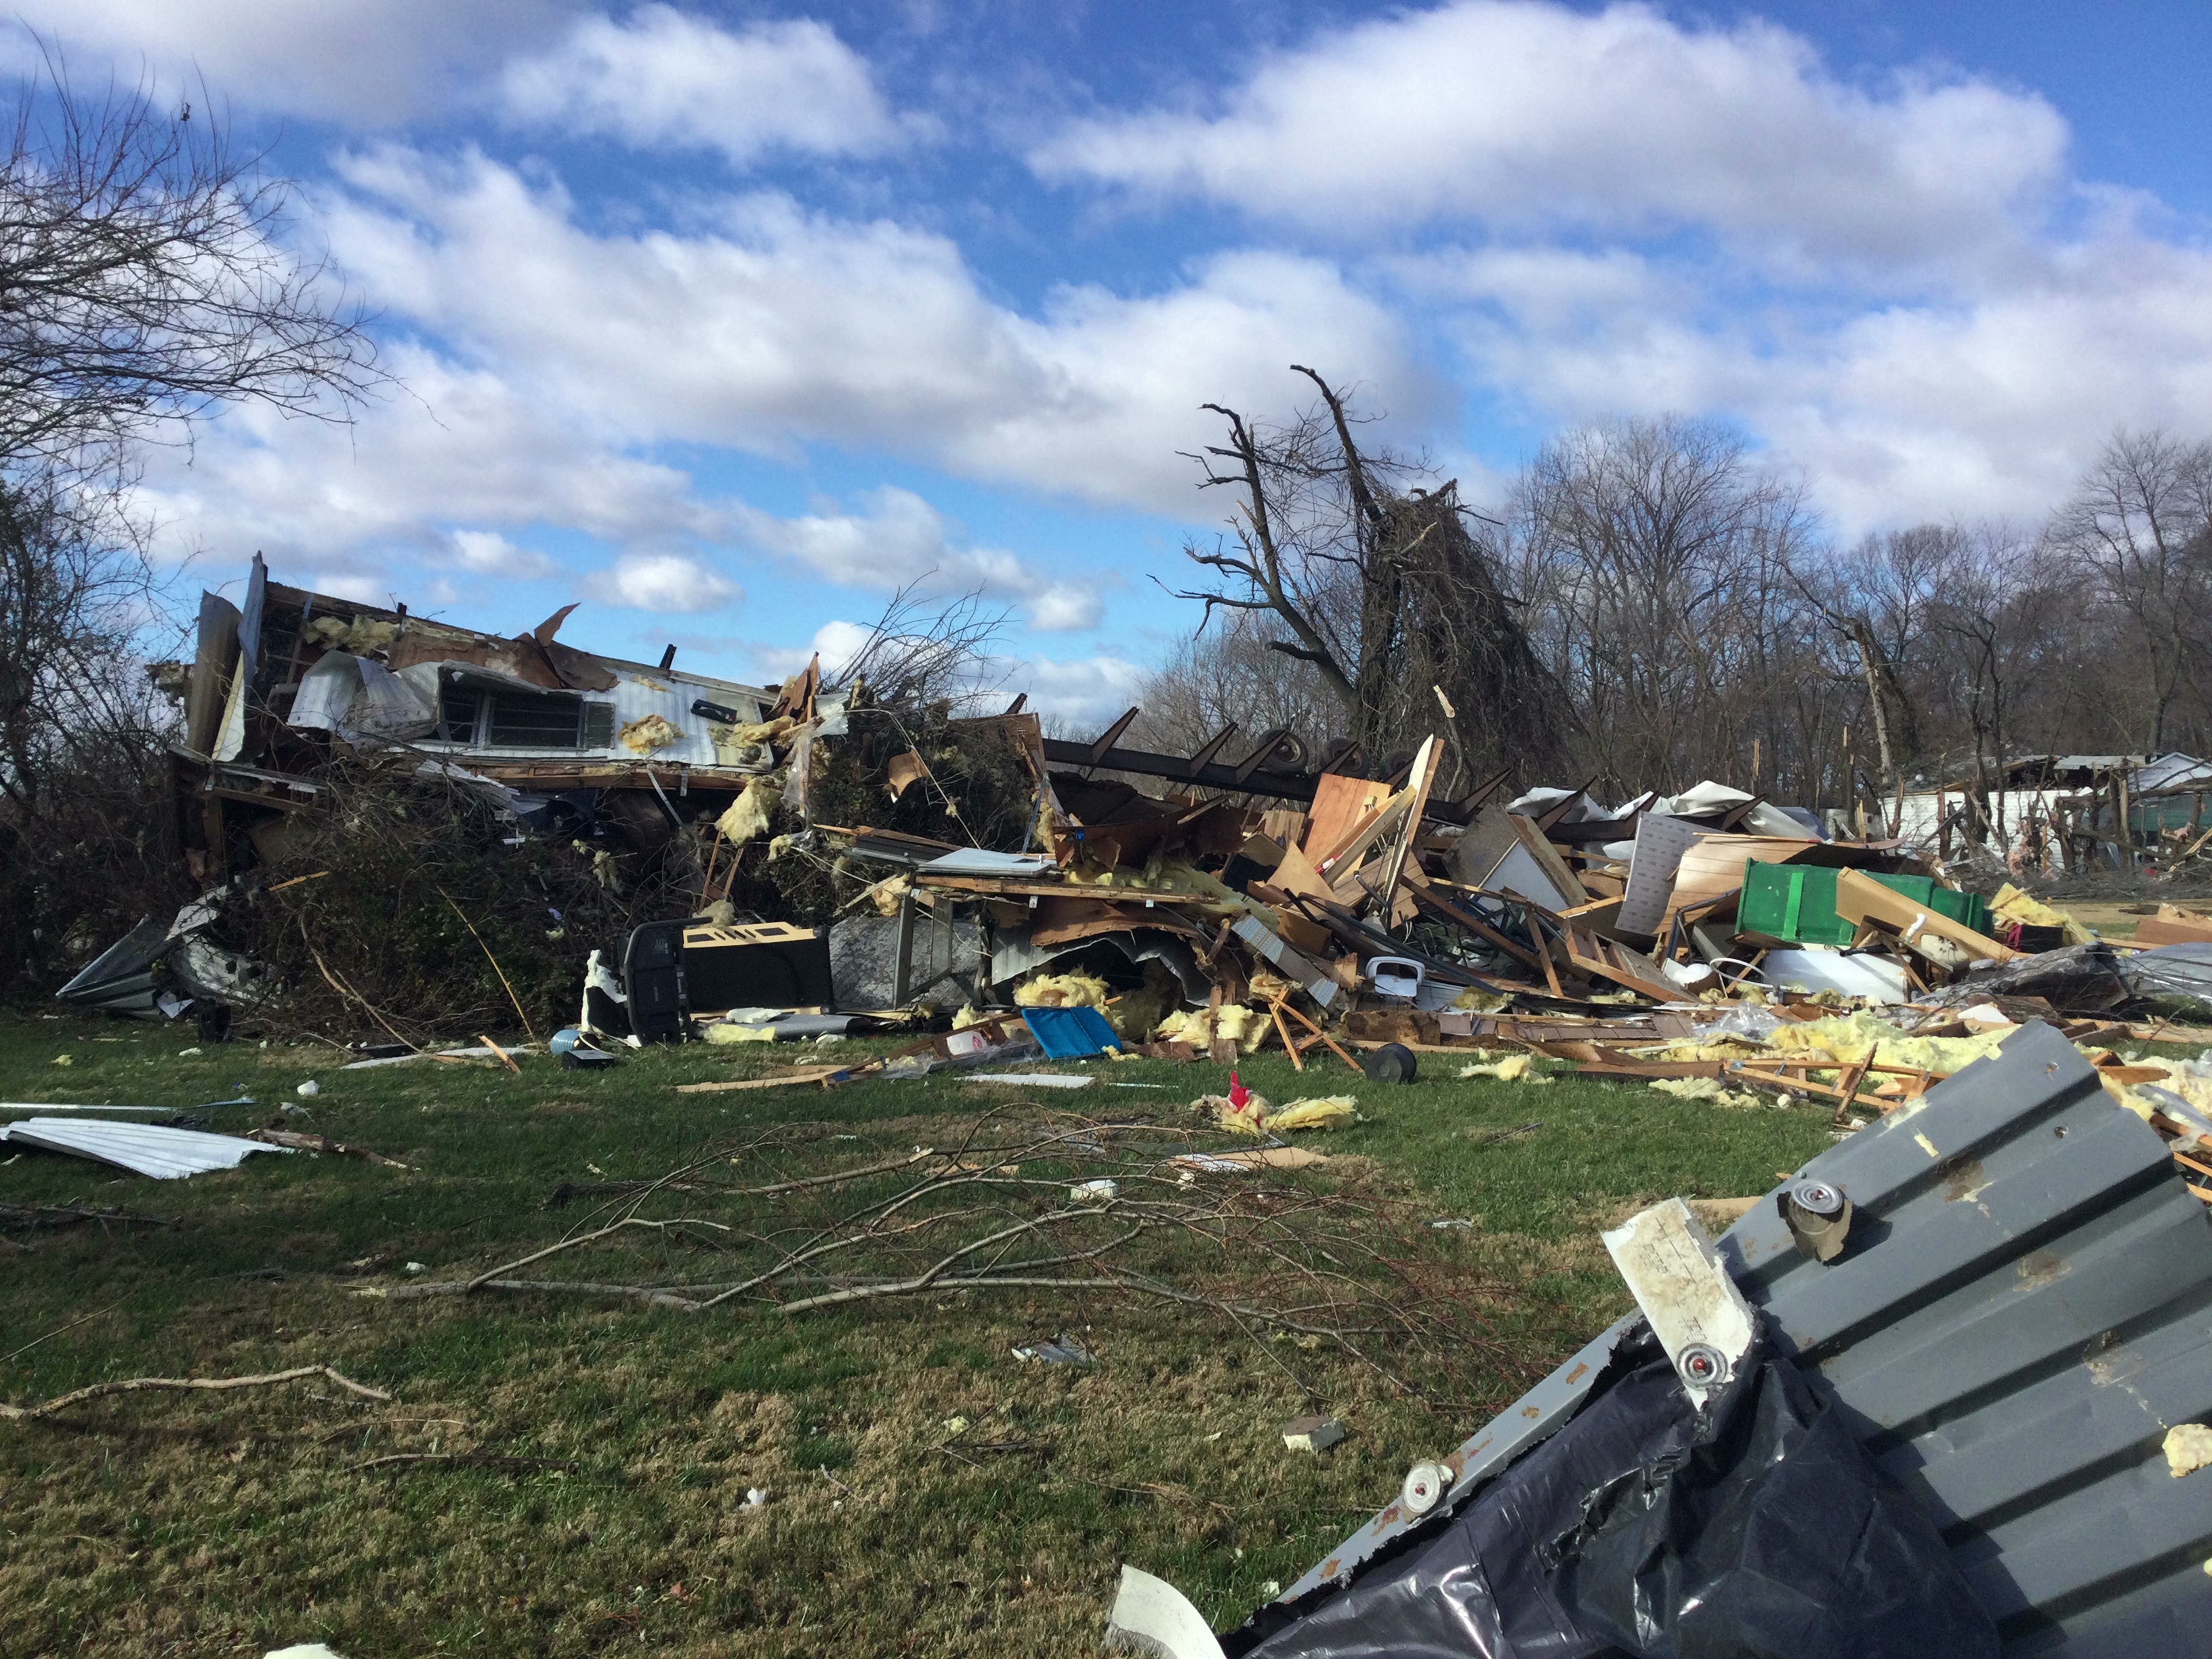 Mobile home is destroyed near Edwardsville, Illinois.